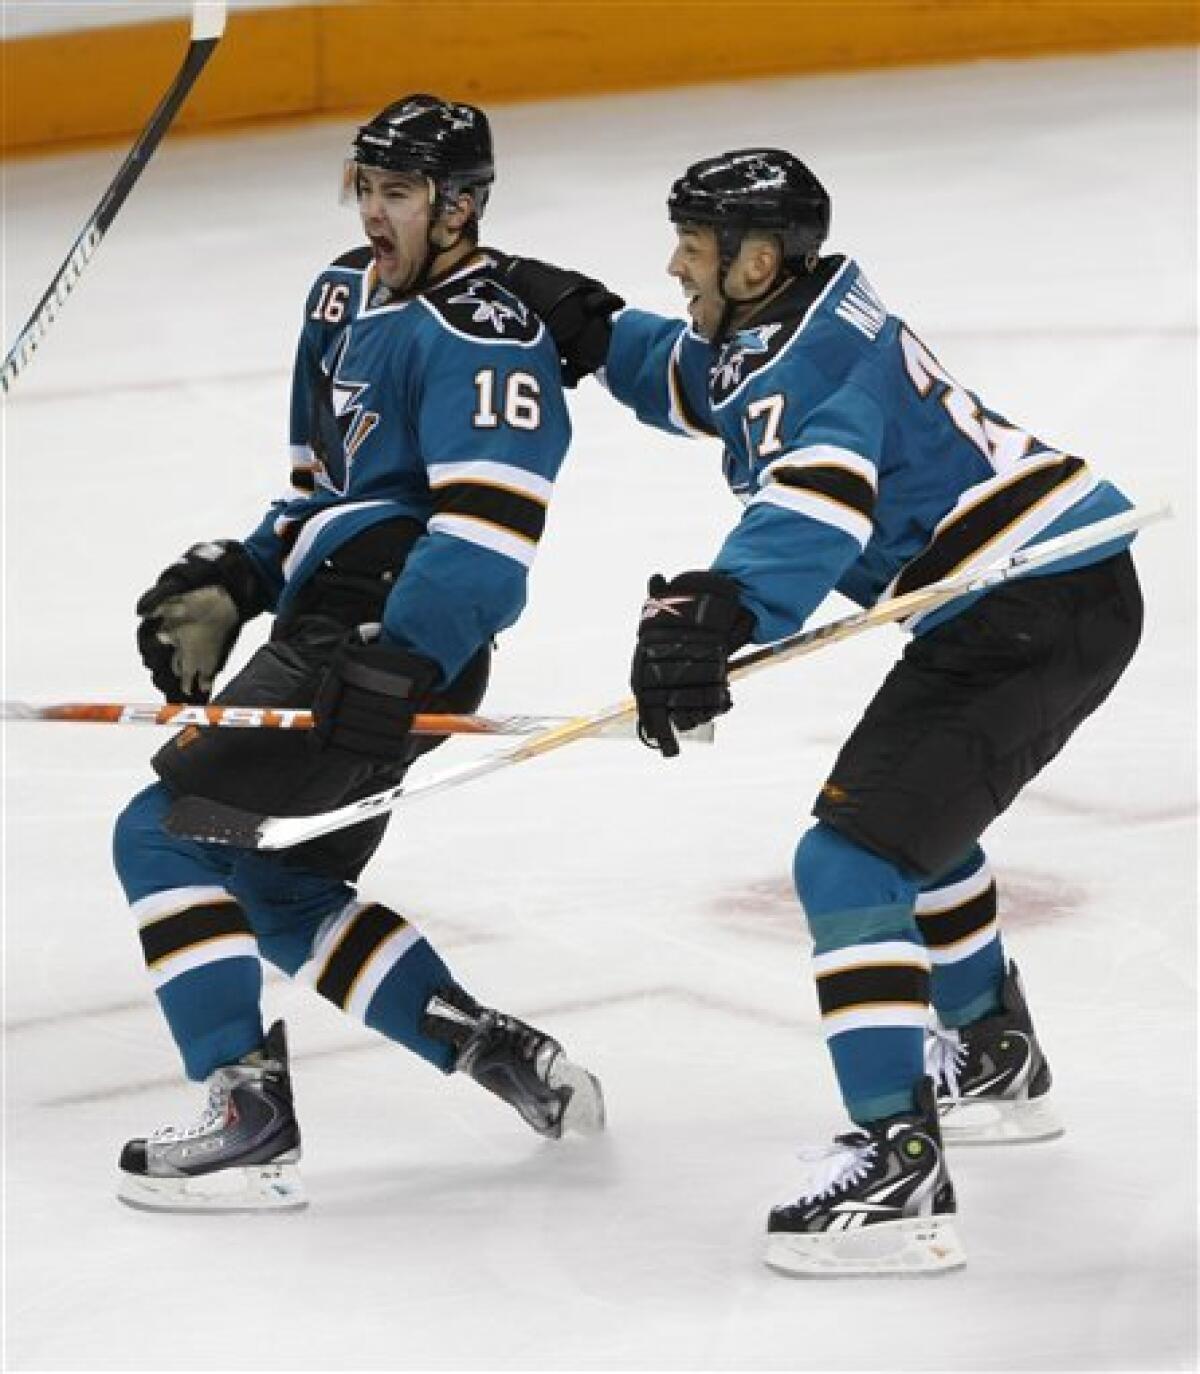 Patrick Marleau, Dany Heatley Have to Rid Sharks of Playoff Curse